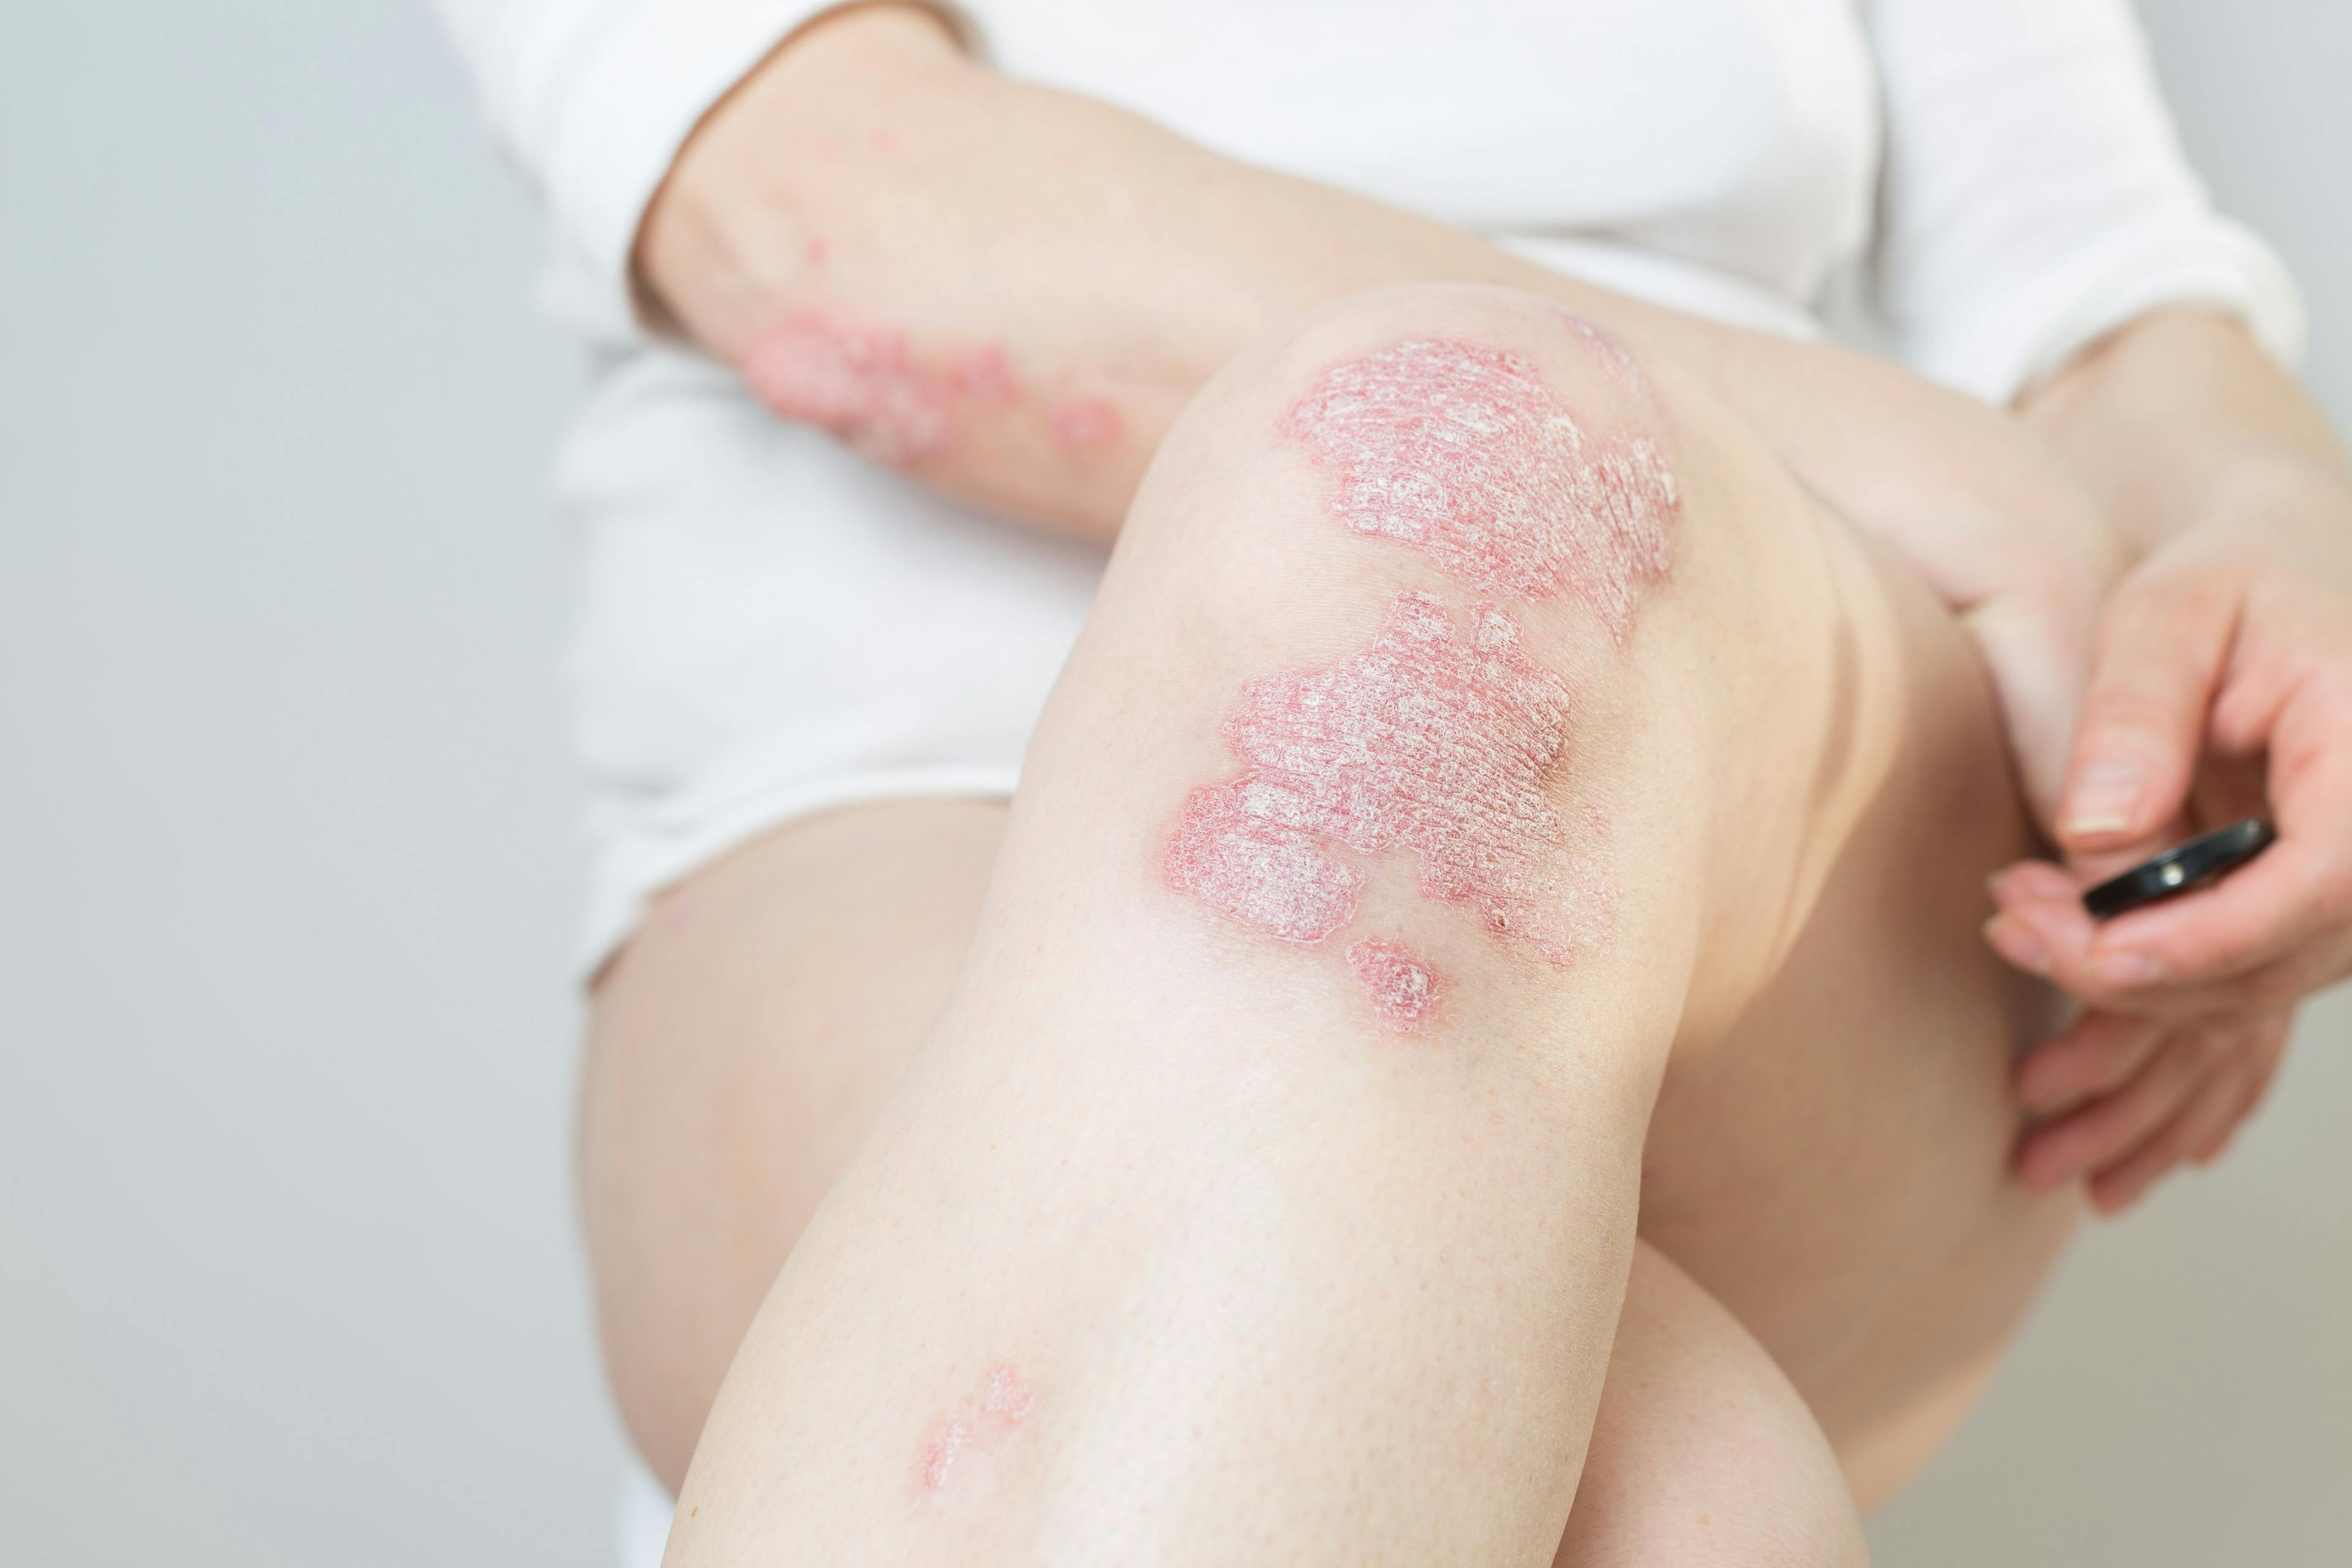 Oral Treatment of Plaque Psoriasis Achieves Primary and Secondary Endpoints in Trial